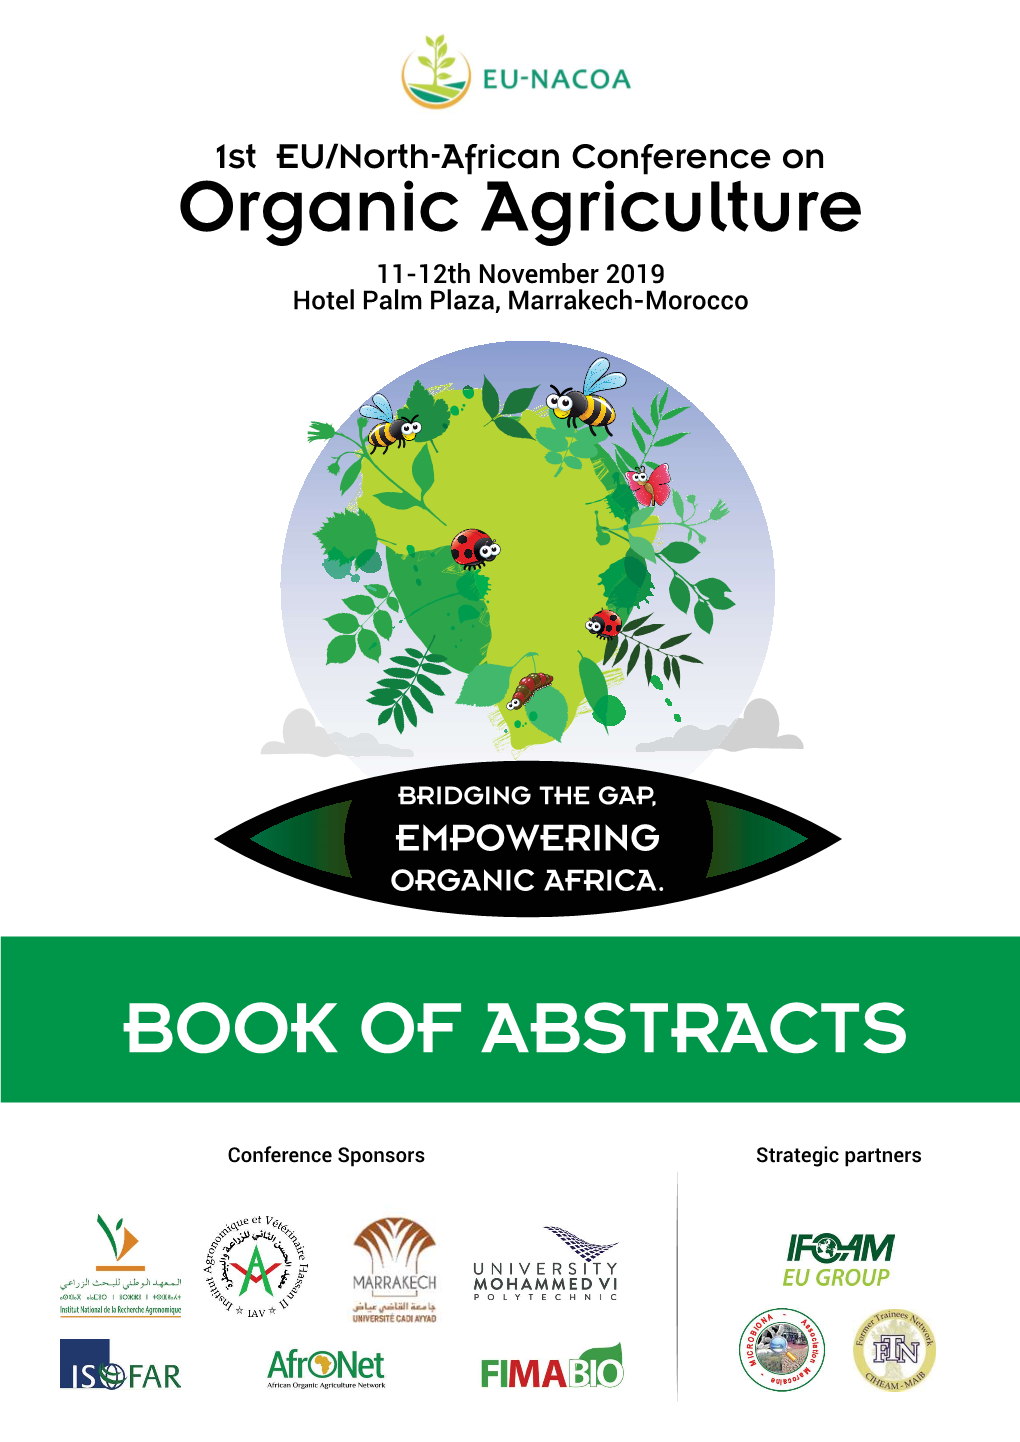 1St EU/North-African Conference on Organic Agriculture (EU-NACOA) “Bridging the Gap, Empowering Organic Africa”